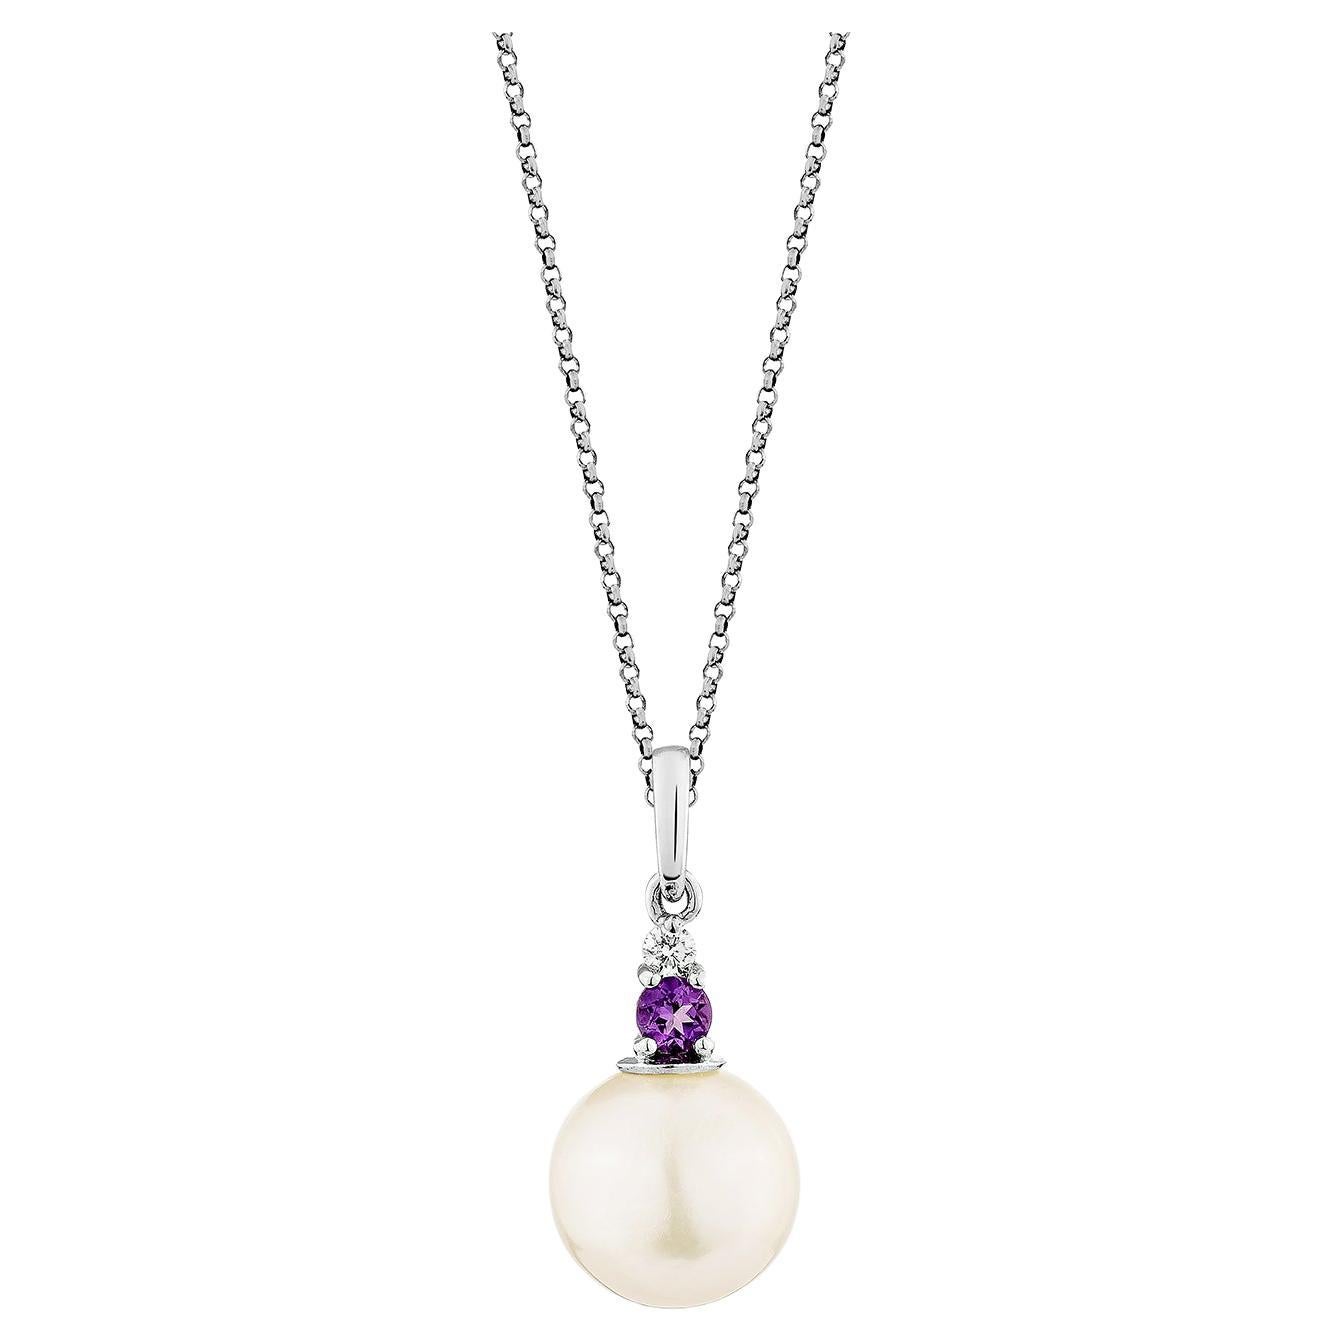 6.34 Carat White Pearl Pendant in 14KWG with Amethyst and White Diamond.